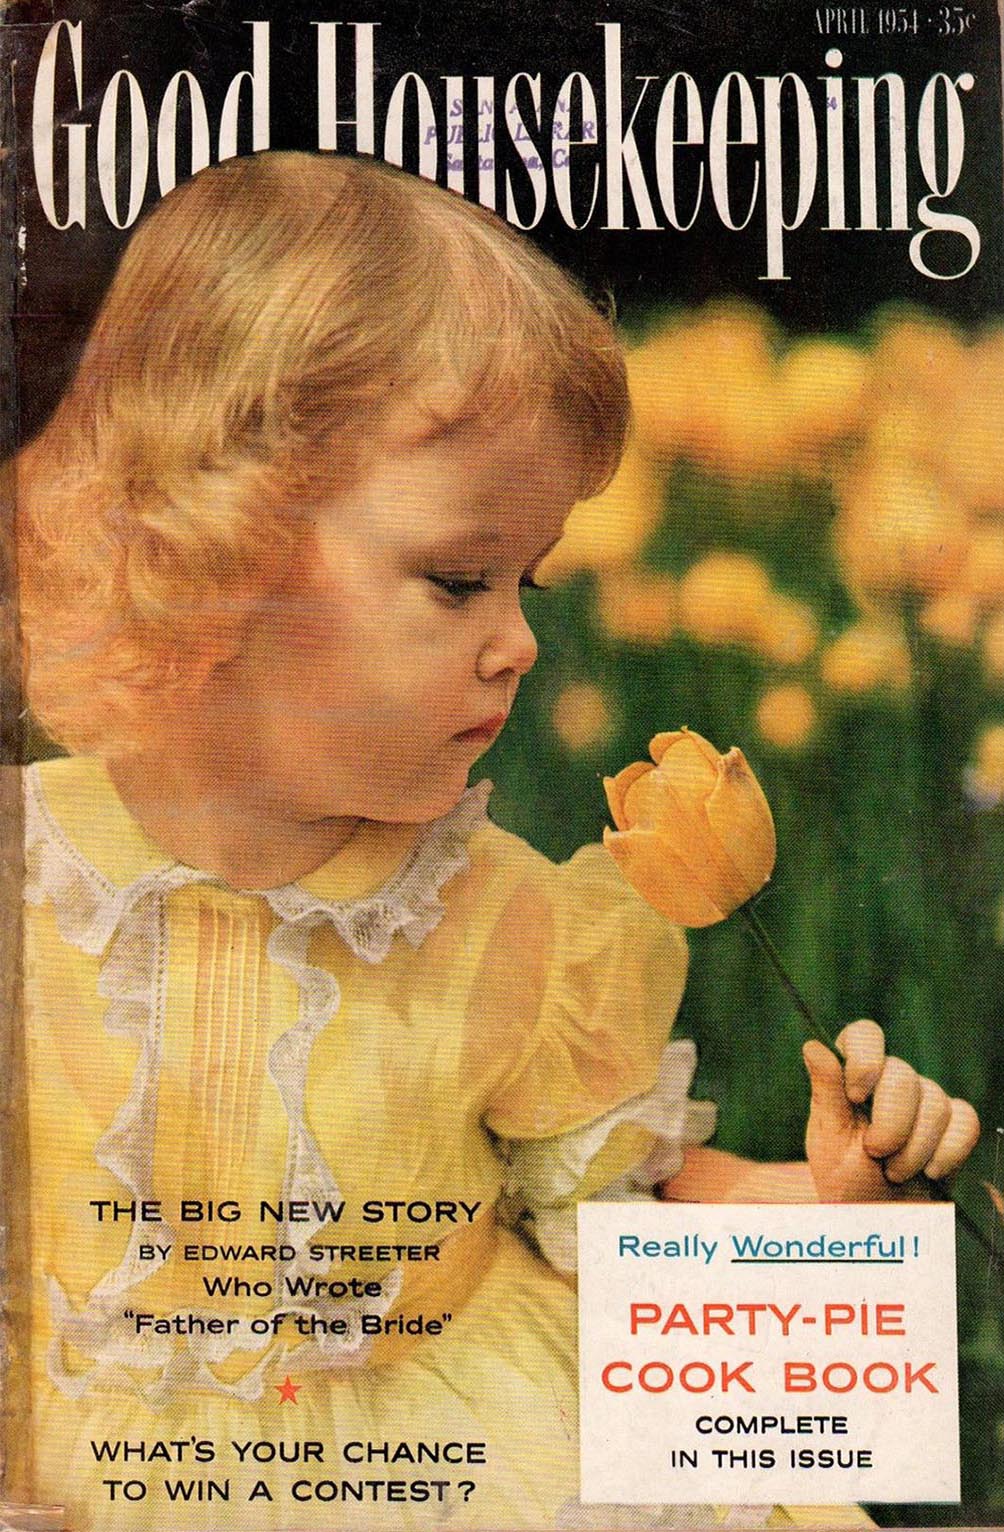 Good Housekeeping April 1954 magazine back issue Good Housekeeping magizine back copy Good Housekeeping April 1954 American womens magazine Back Issue Published by Hearst Publishing Corporation. The Big New Story By Edward Streeter Who Wrote Father Of The Bride.